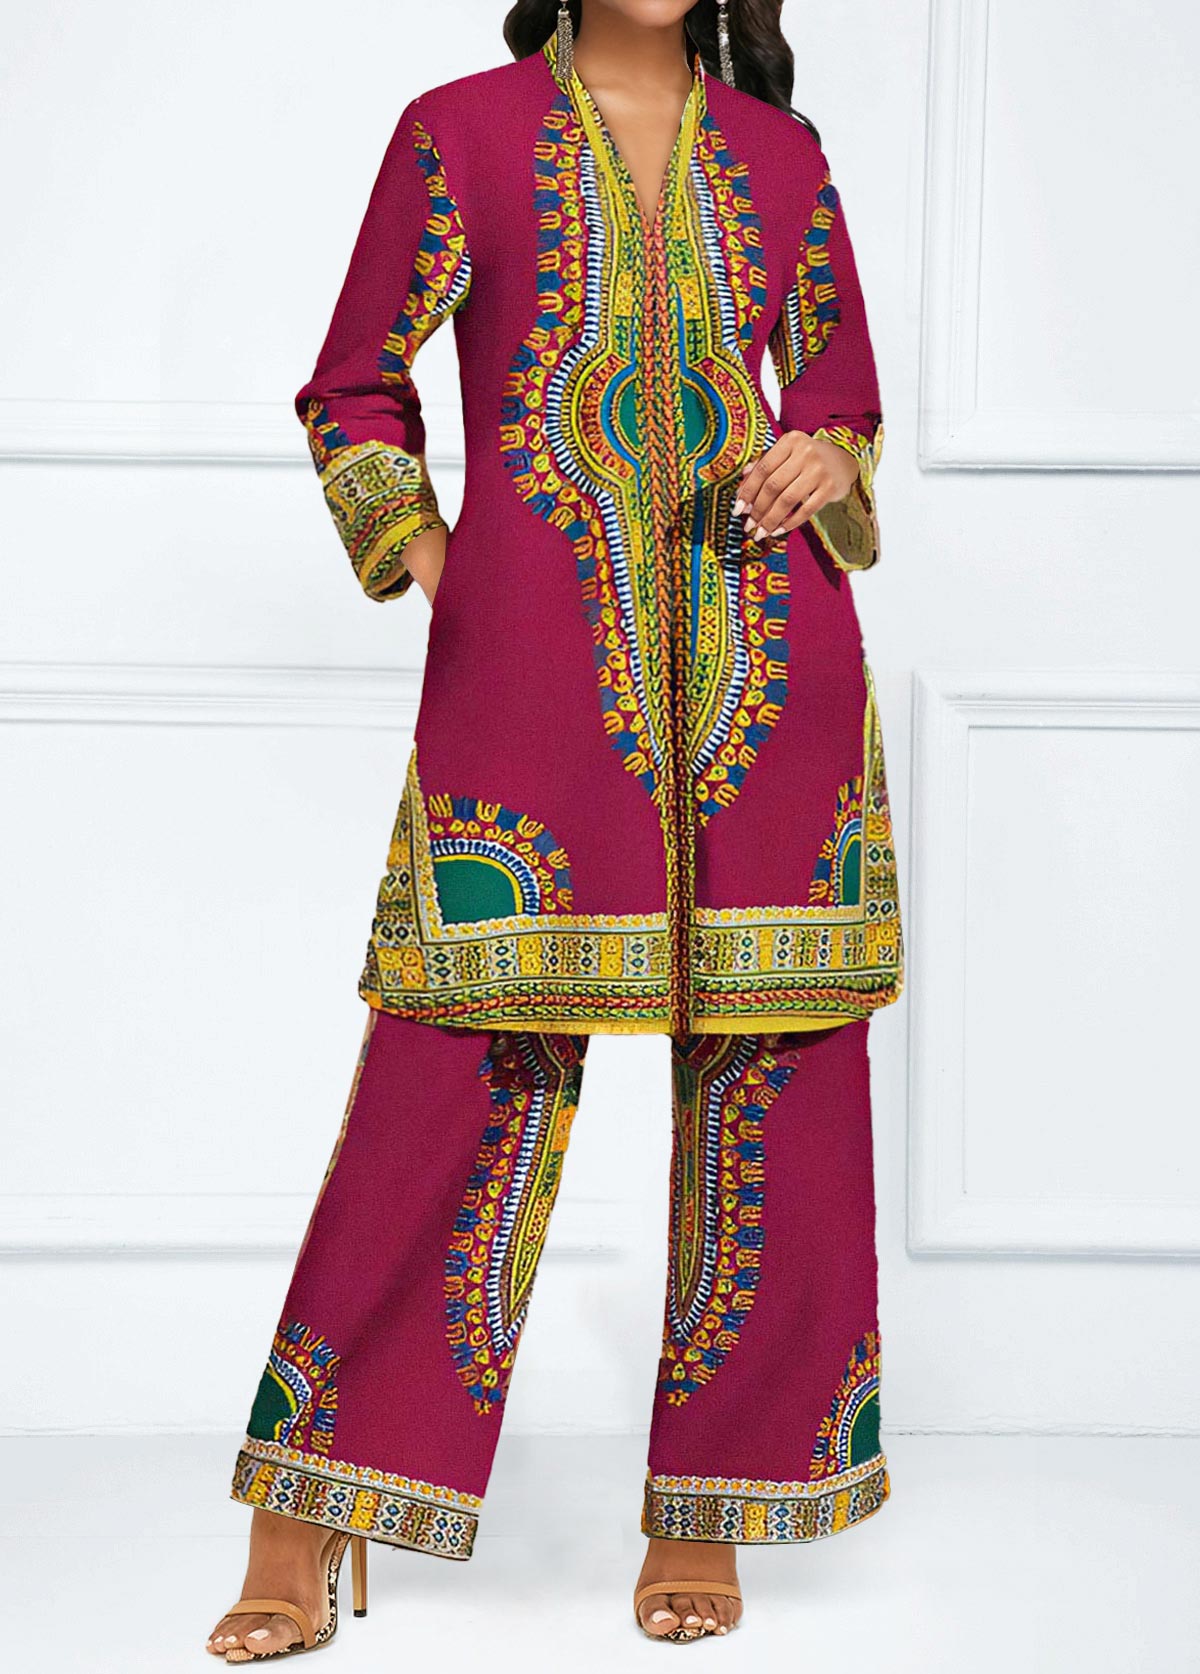 Hot Pink Zipper African Tribal Print Top and Pants